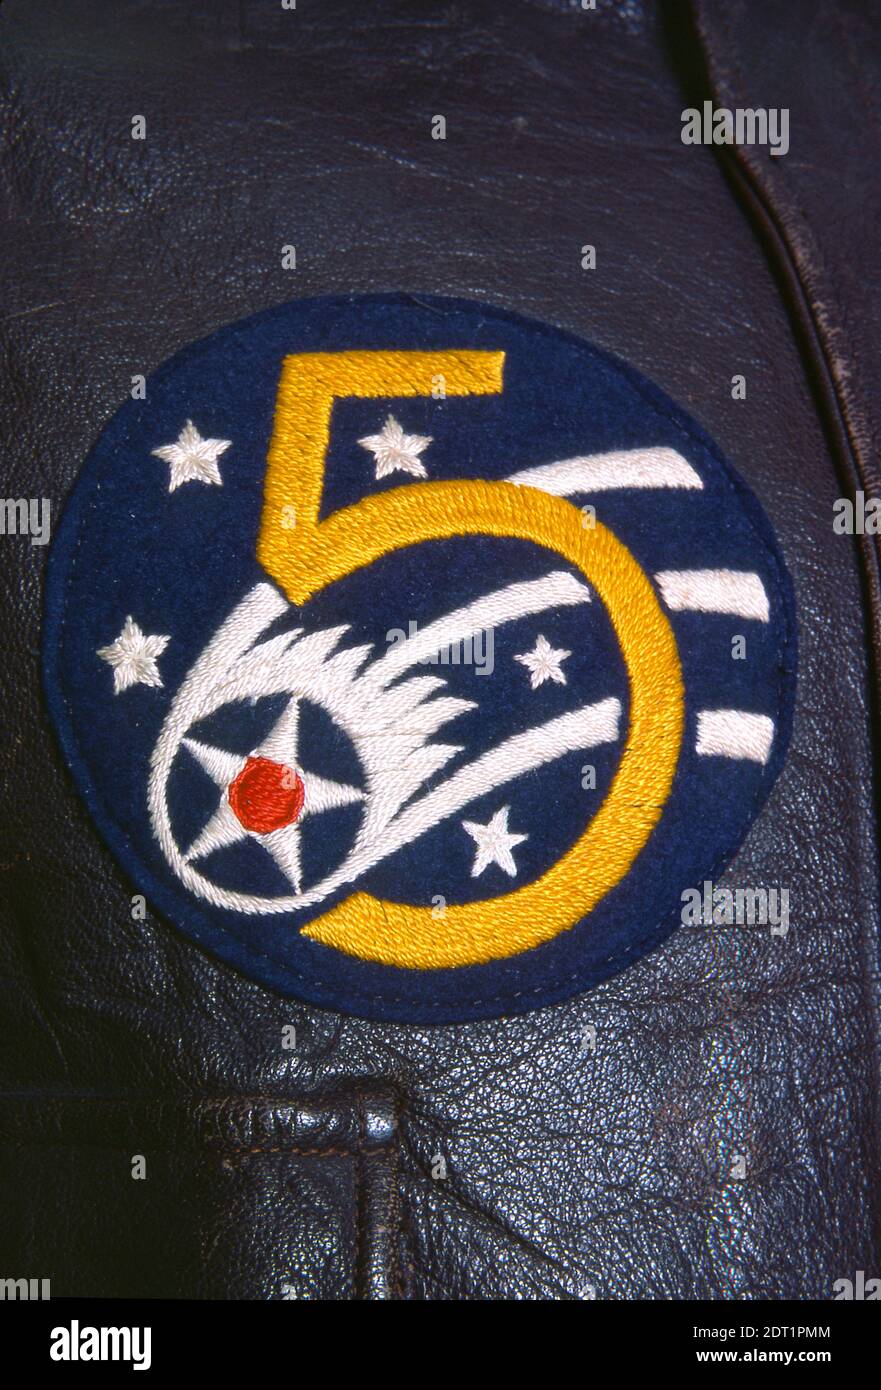 US Army Air Corps 5th Air Force Medaillon und Schulterpatch. Stockfoto